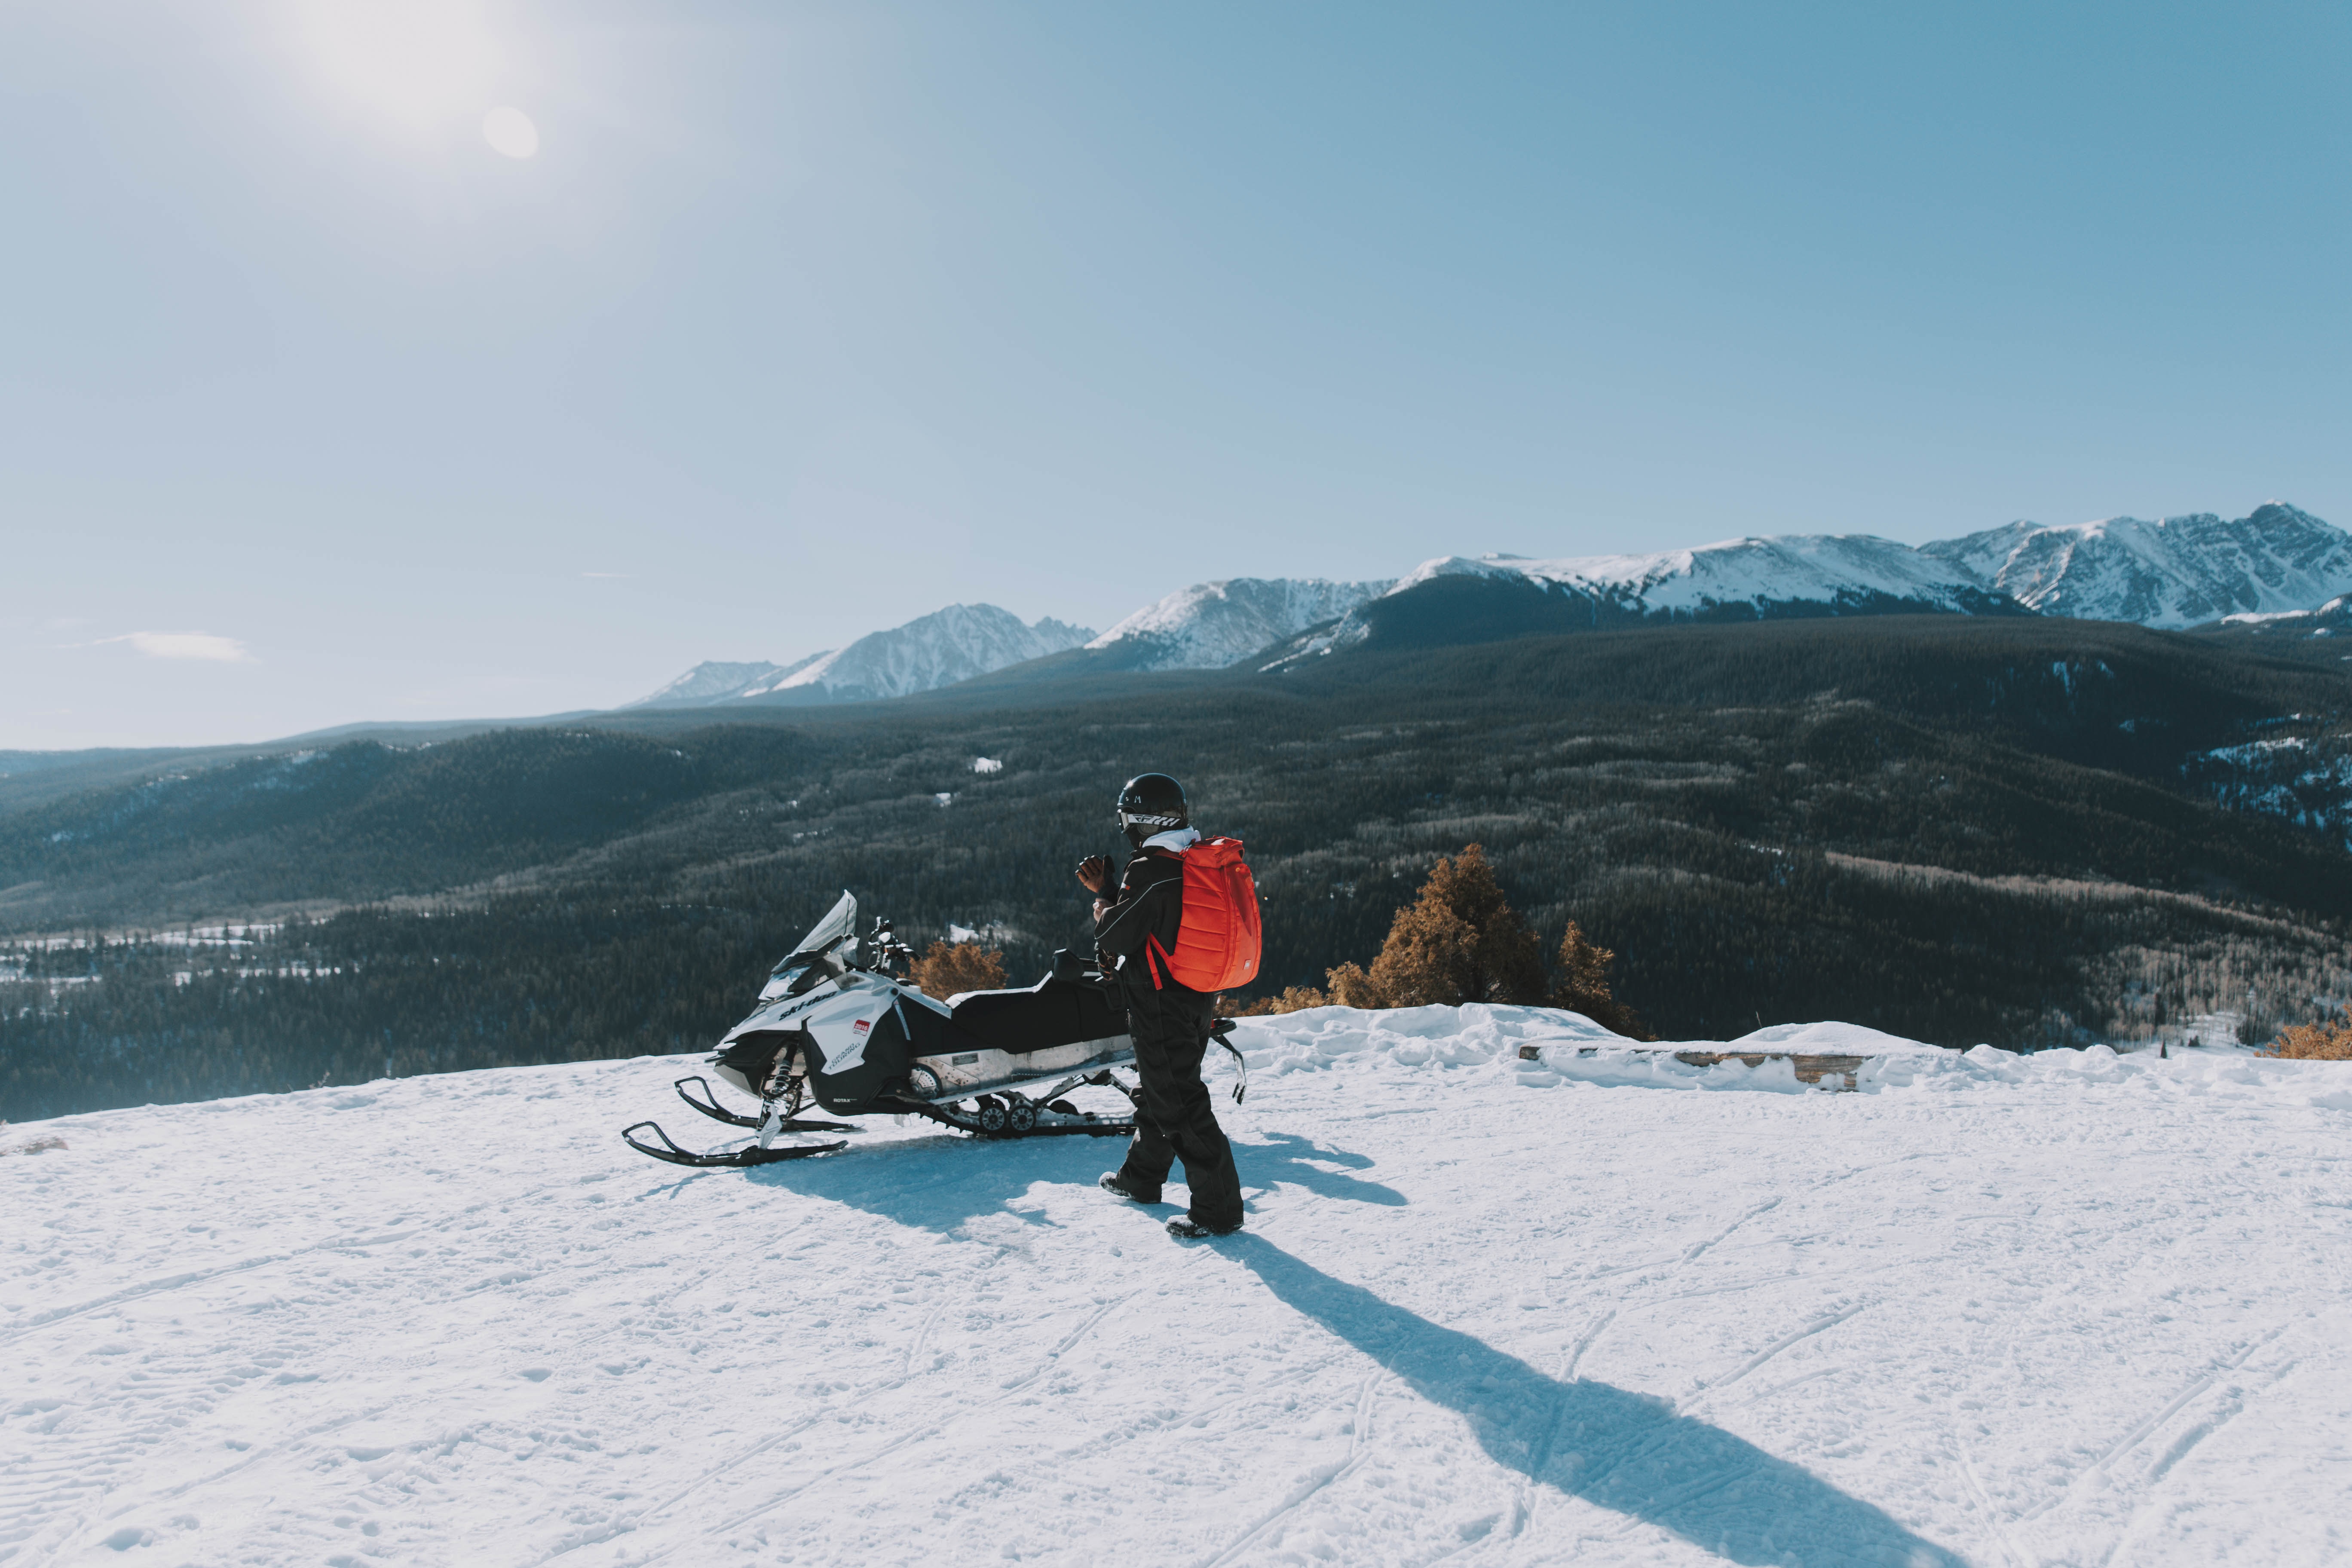 Man walks toward a snowmobile parked on a ridge overlooking a vast wilderness with mountains in the background